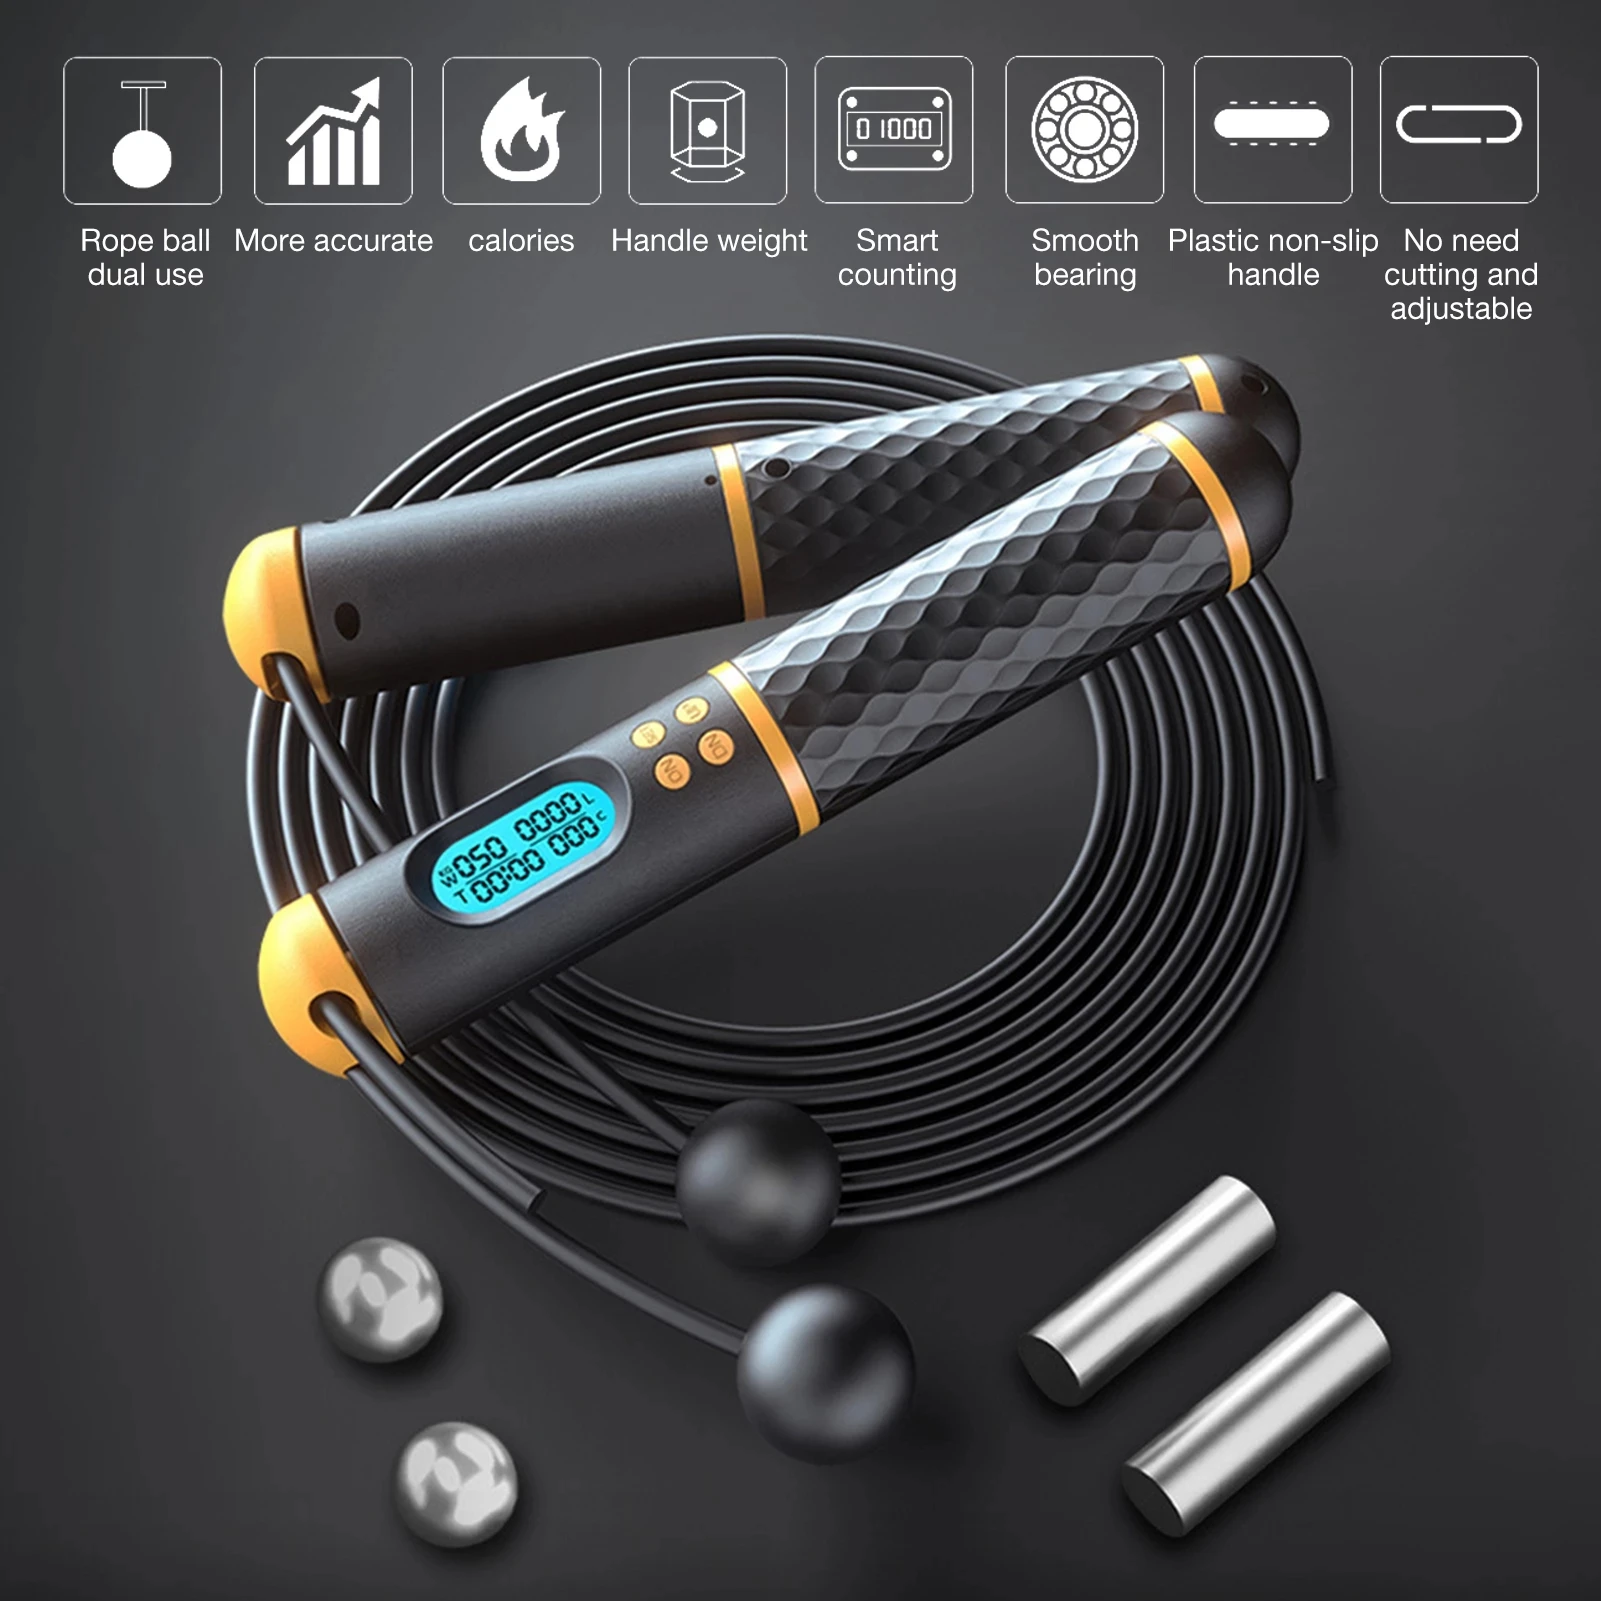 Digital Counter Jump Rope Cordless Skipping Fitness Lose Weight Boxing Training 